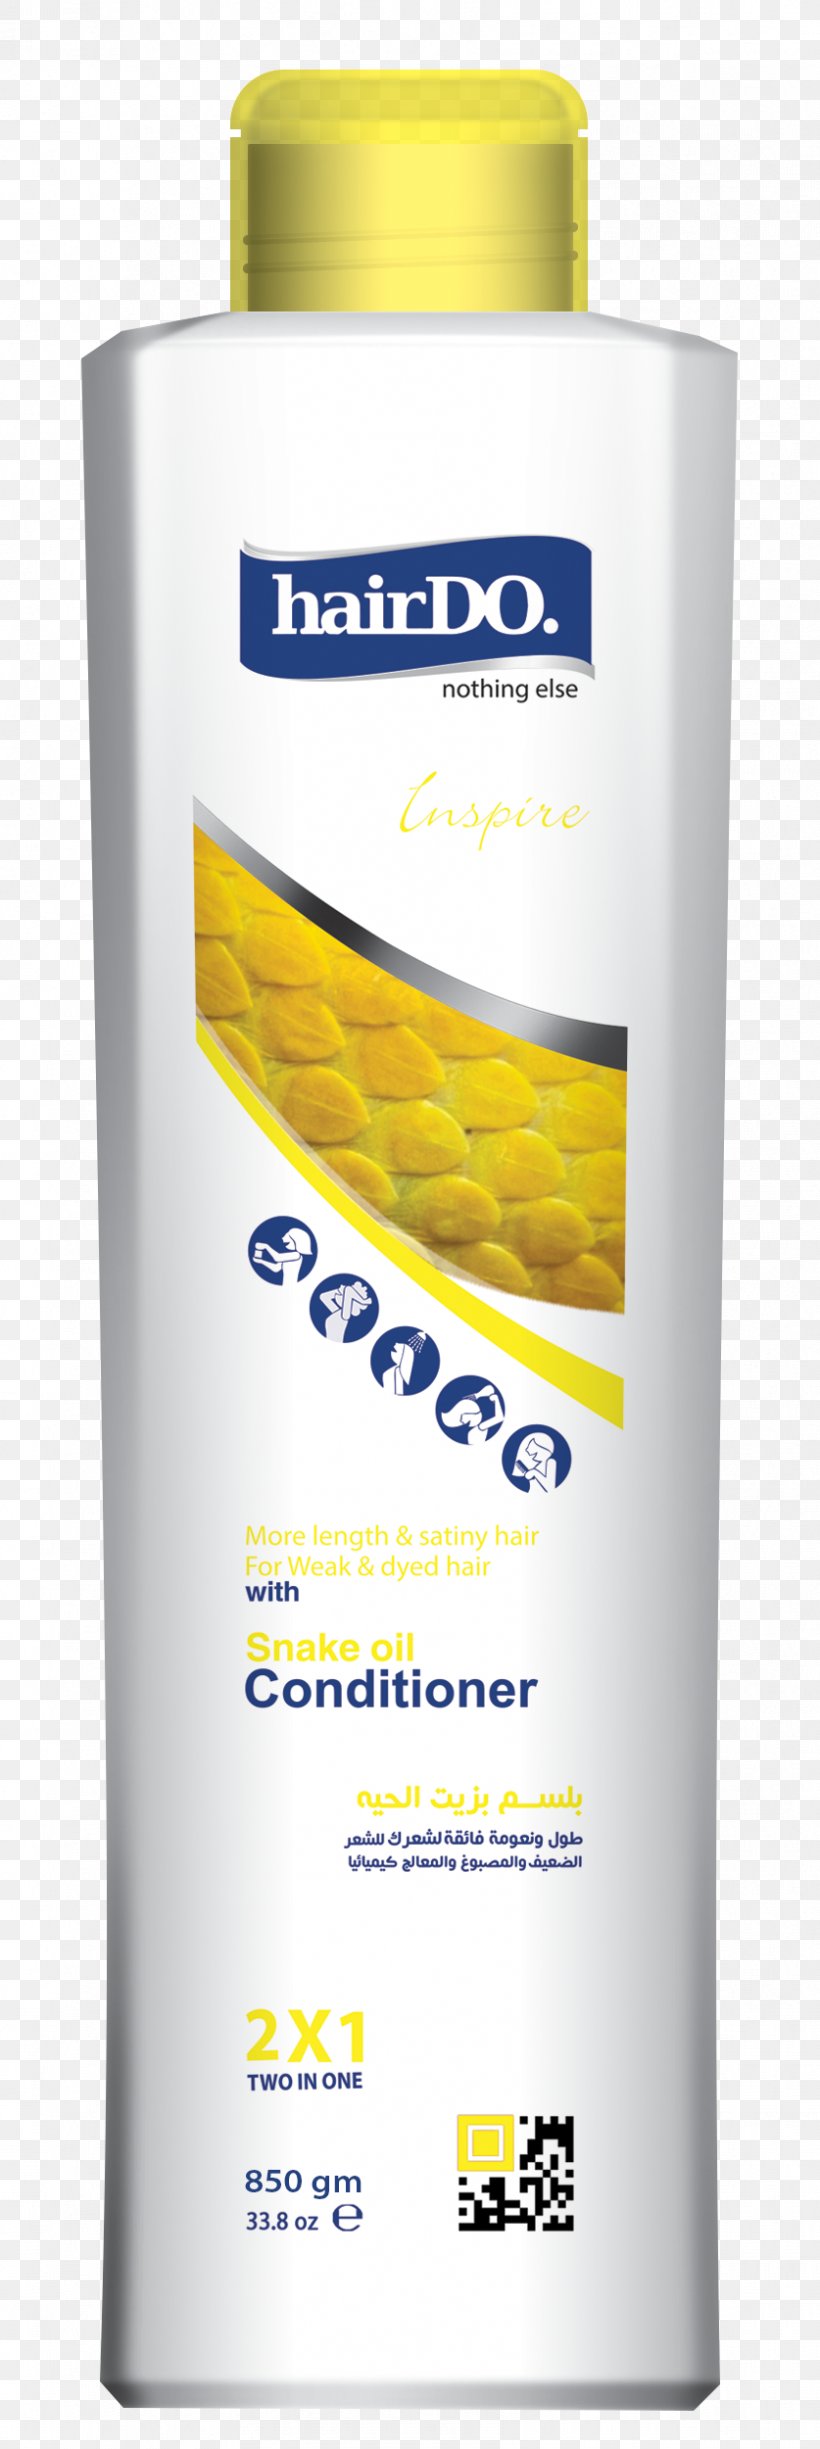 Lotion Egypt Cosmeceutical Cosmetics Skin Care, PNG, 837x2500px, Lotion, Cosmeceutical, Cosmetics, Egypt, Egyptians Download Free